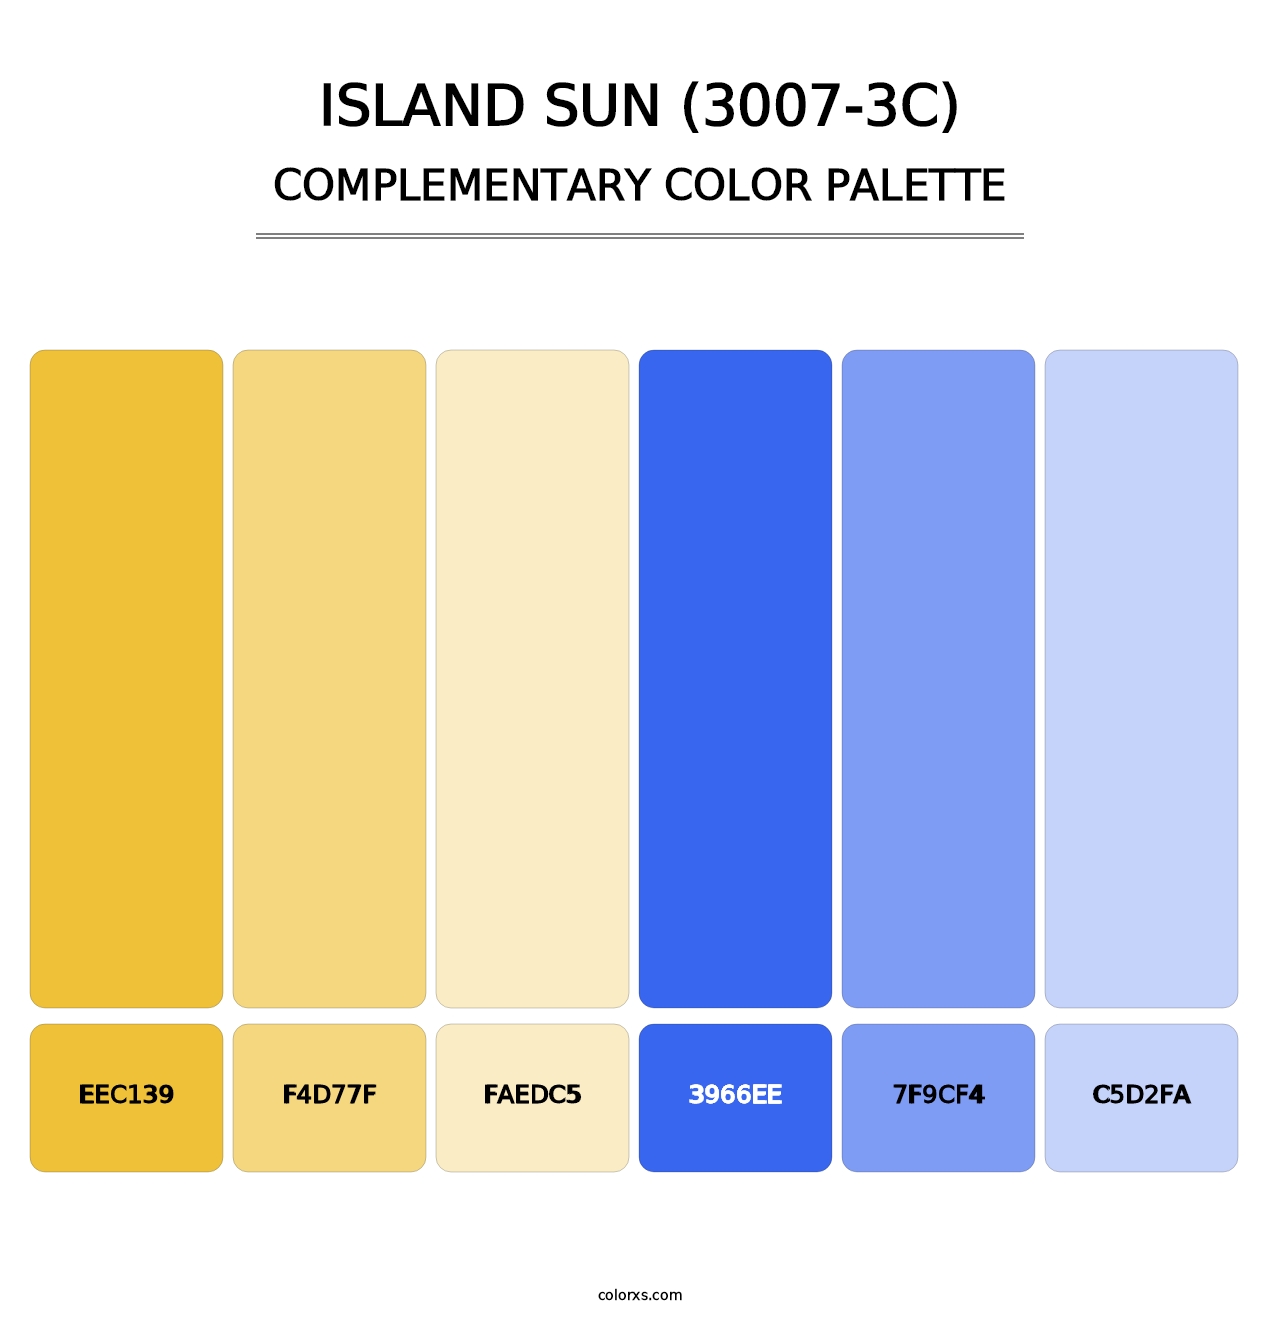 Island Sun (3007-3C) - Complementary Color Palette